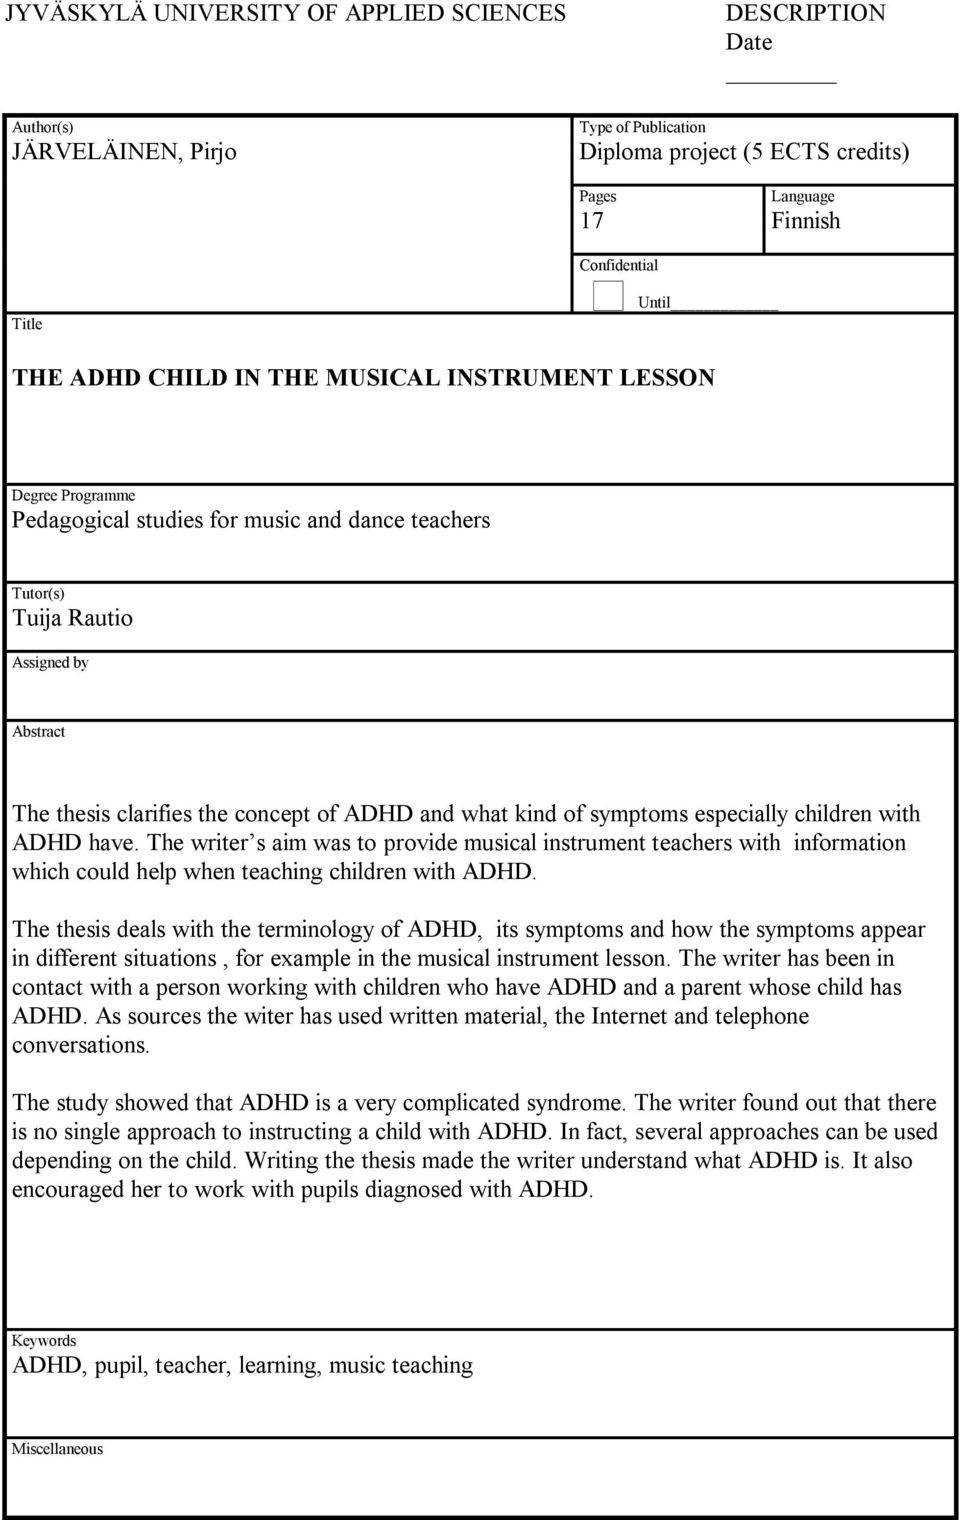 kind of symptoms especially children with ADHD have. The writer s aim was to provide musical instrument teachers with information which could help when teaching children with ADHD.